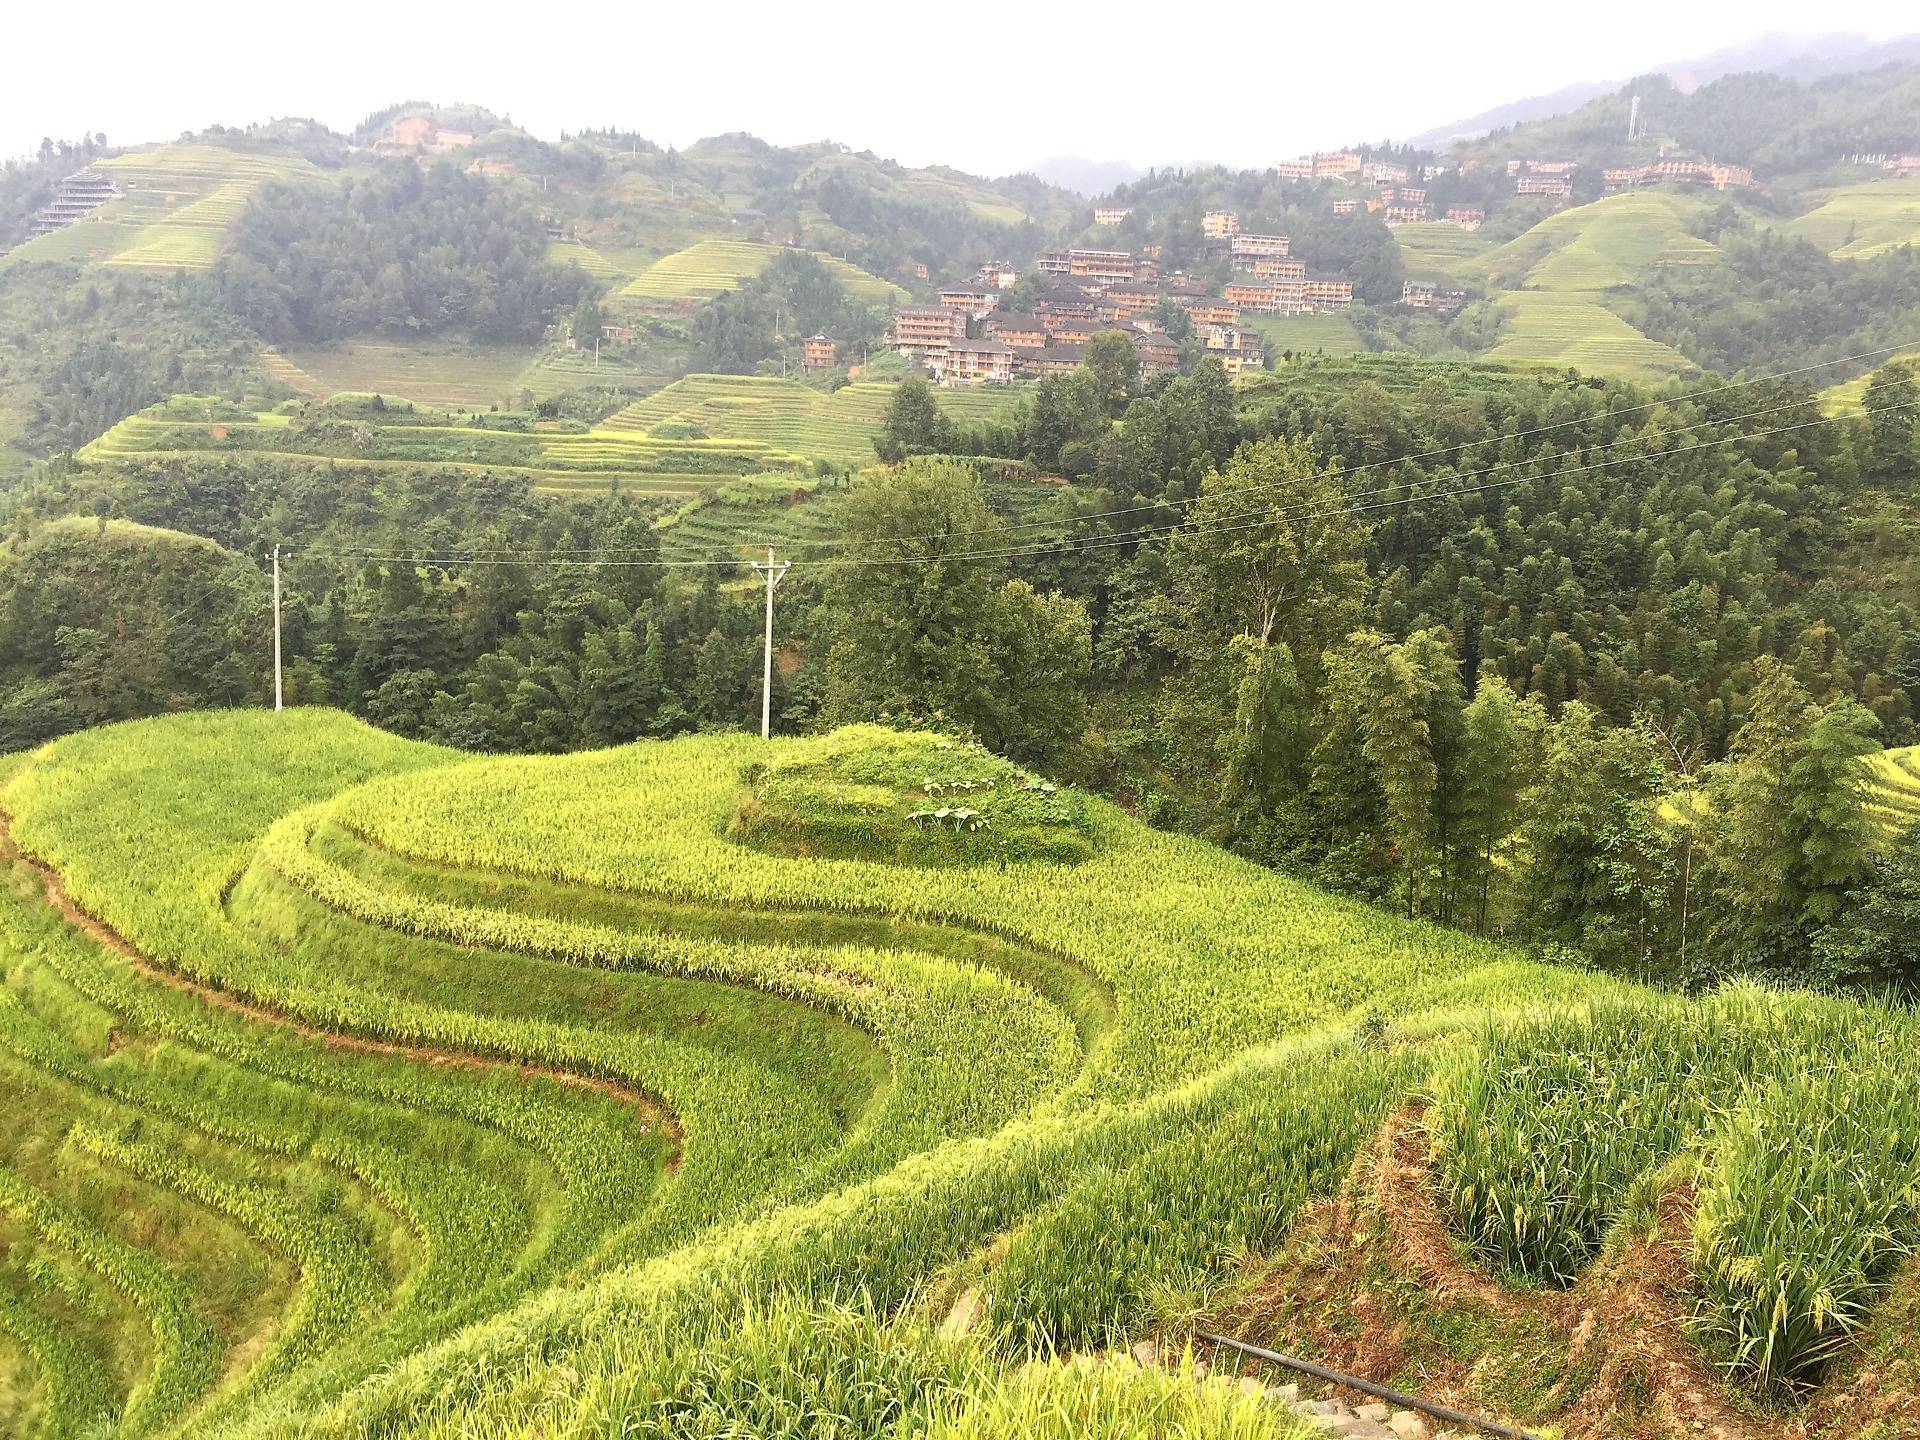 A trip to Guilin. Part 2. Rice terraces of Longji.